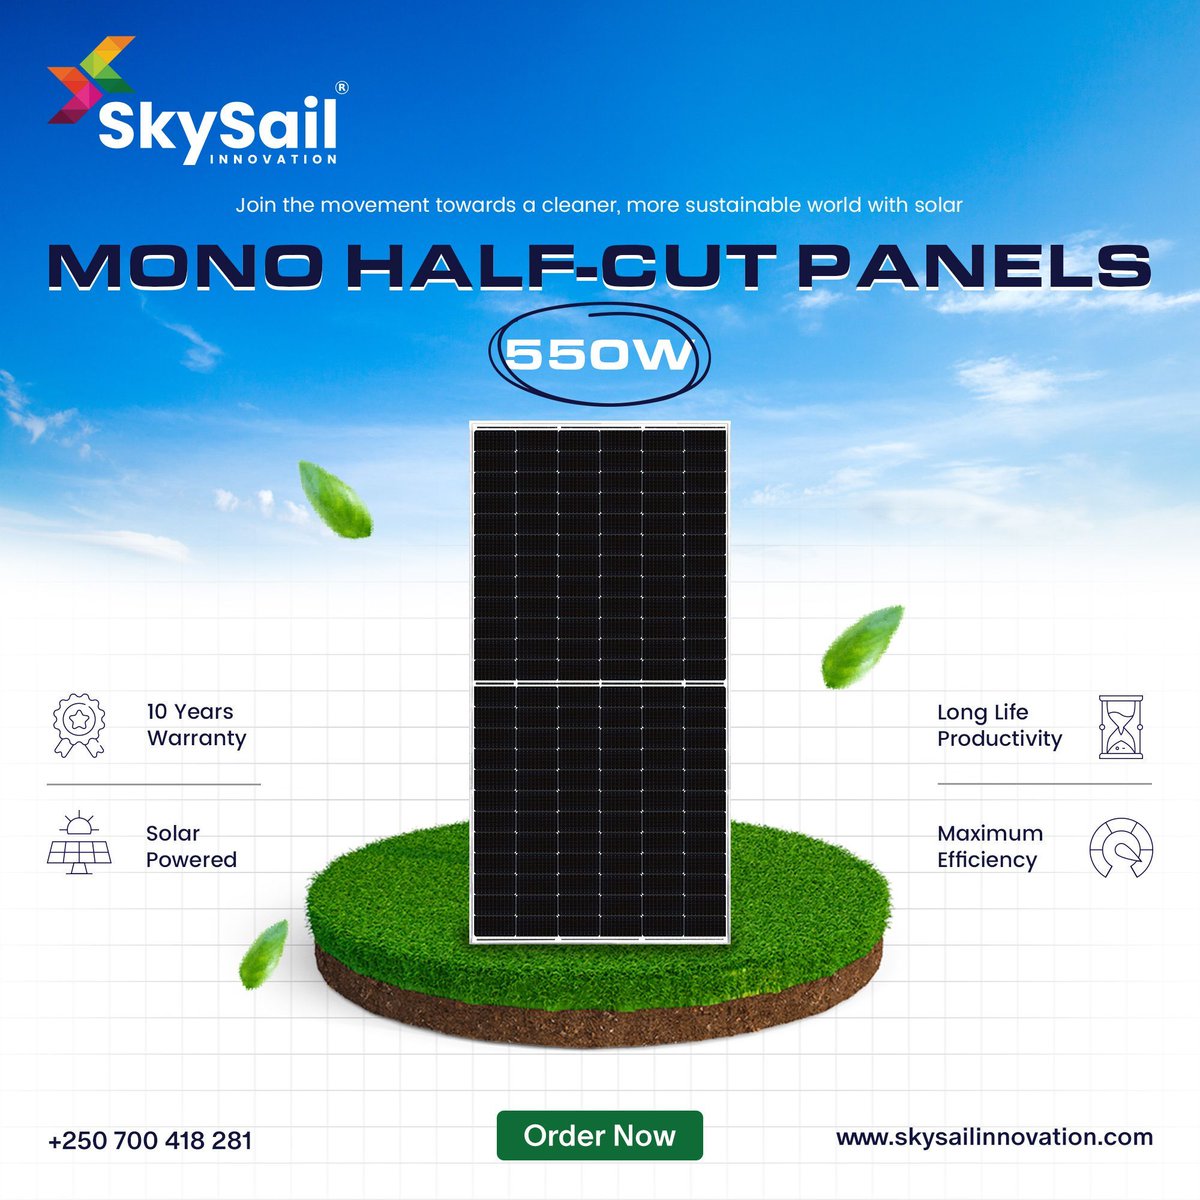 🌍 Join the movement towards a cleaner, more sustainable world with SkySail Innovation's Solar Mono Half-Cut Panel 550W! 🌞 Embrace cutting-edge technology and maximize your solar power generation. Let's pave the way for a brighter, greener future together! 💡 #SkySailInnovation